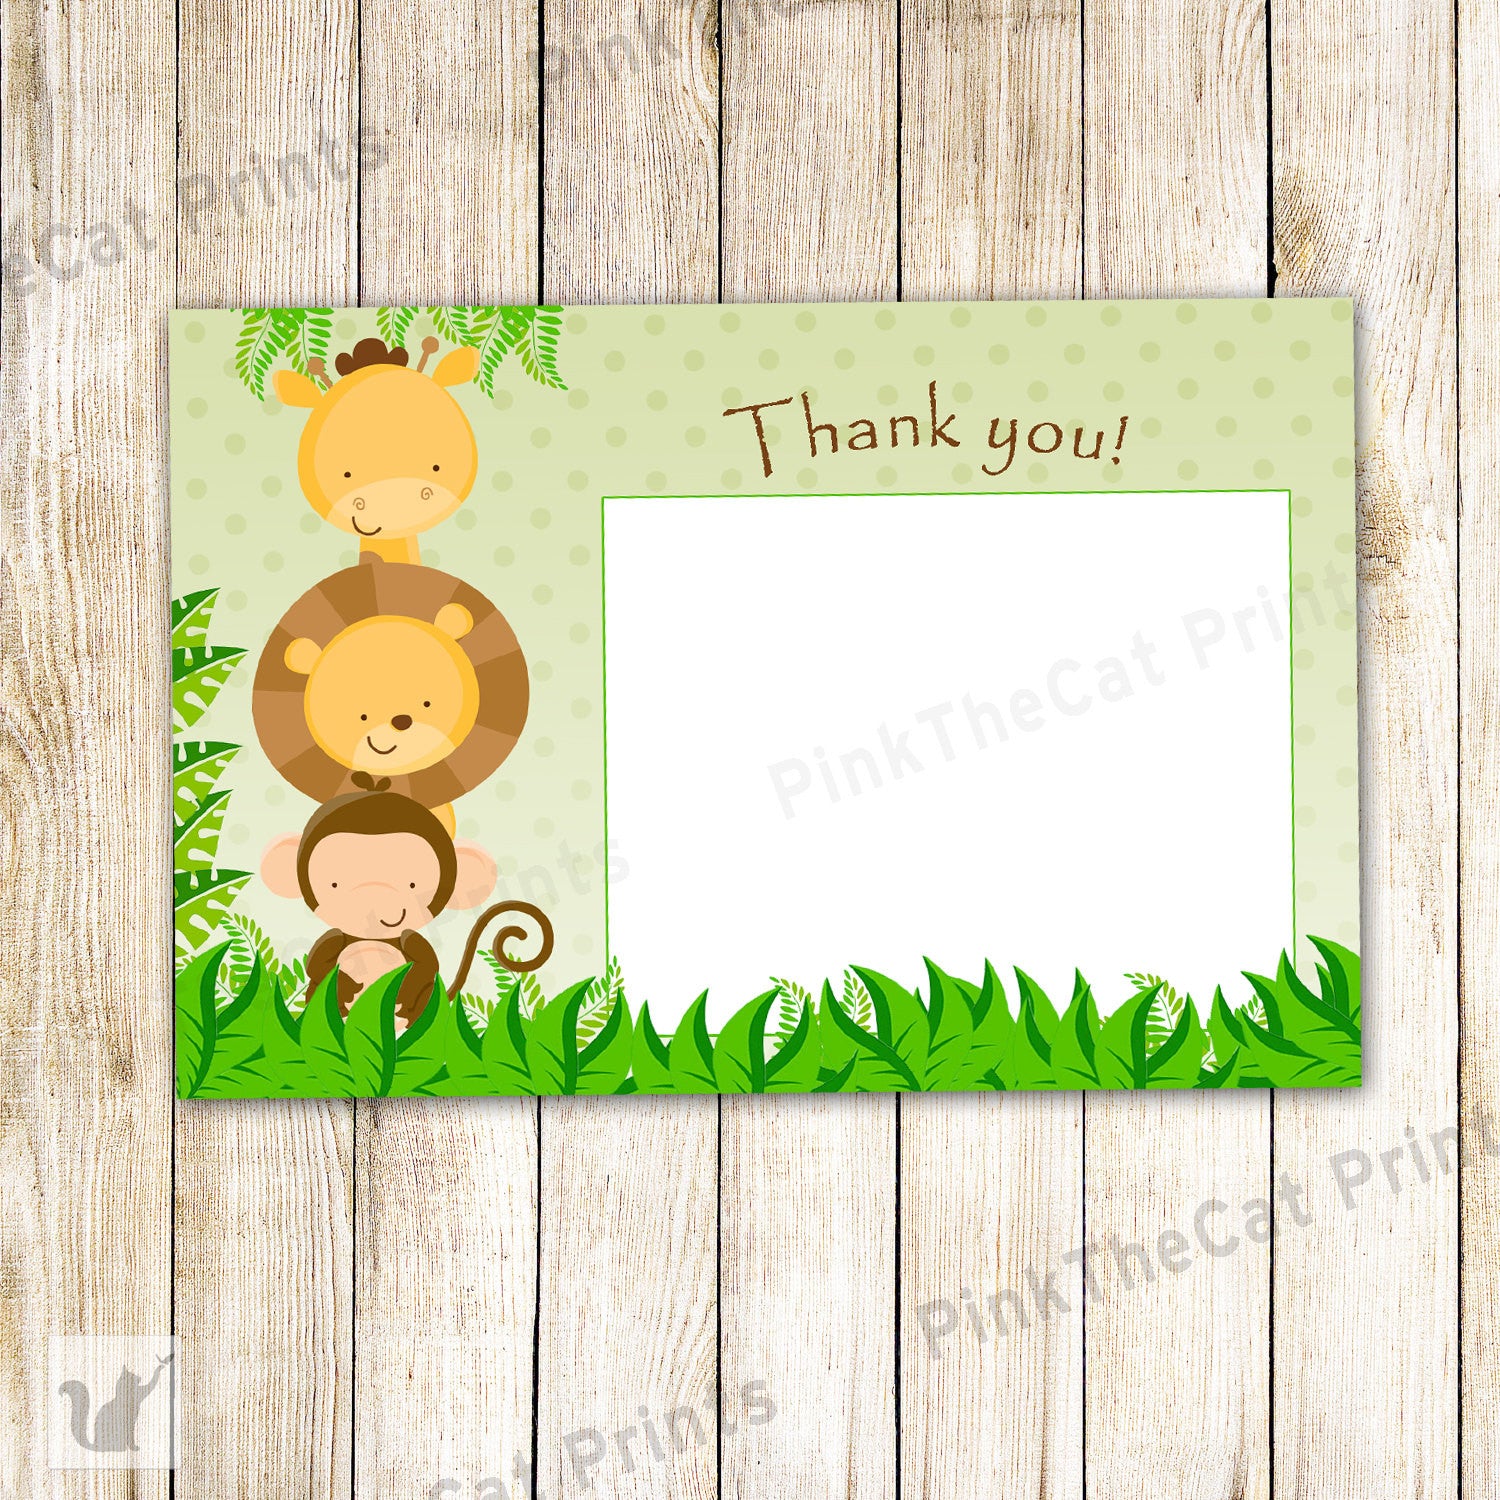 Jungle Thank You Note, Jungle Baby Shower, Jungle Birthday Party, Boy Birthday Party, Printable File, Greeting Card, Green Brown, GET IT NOW